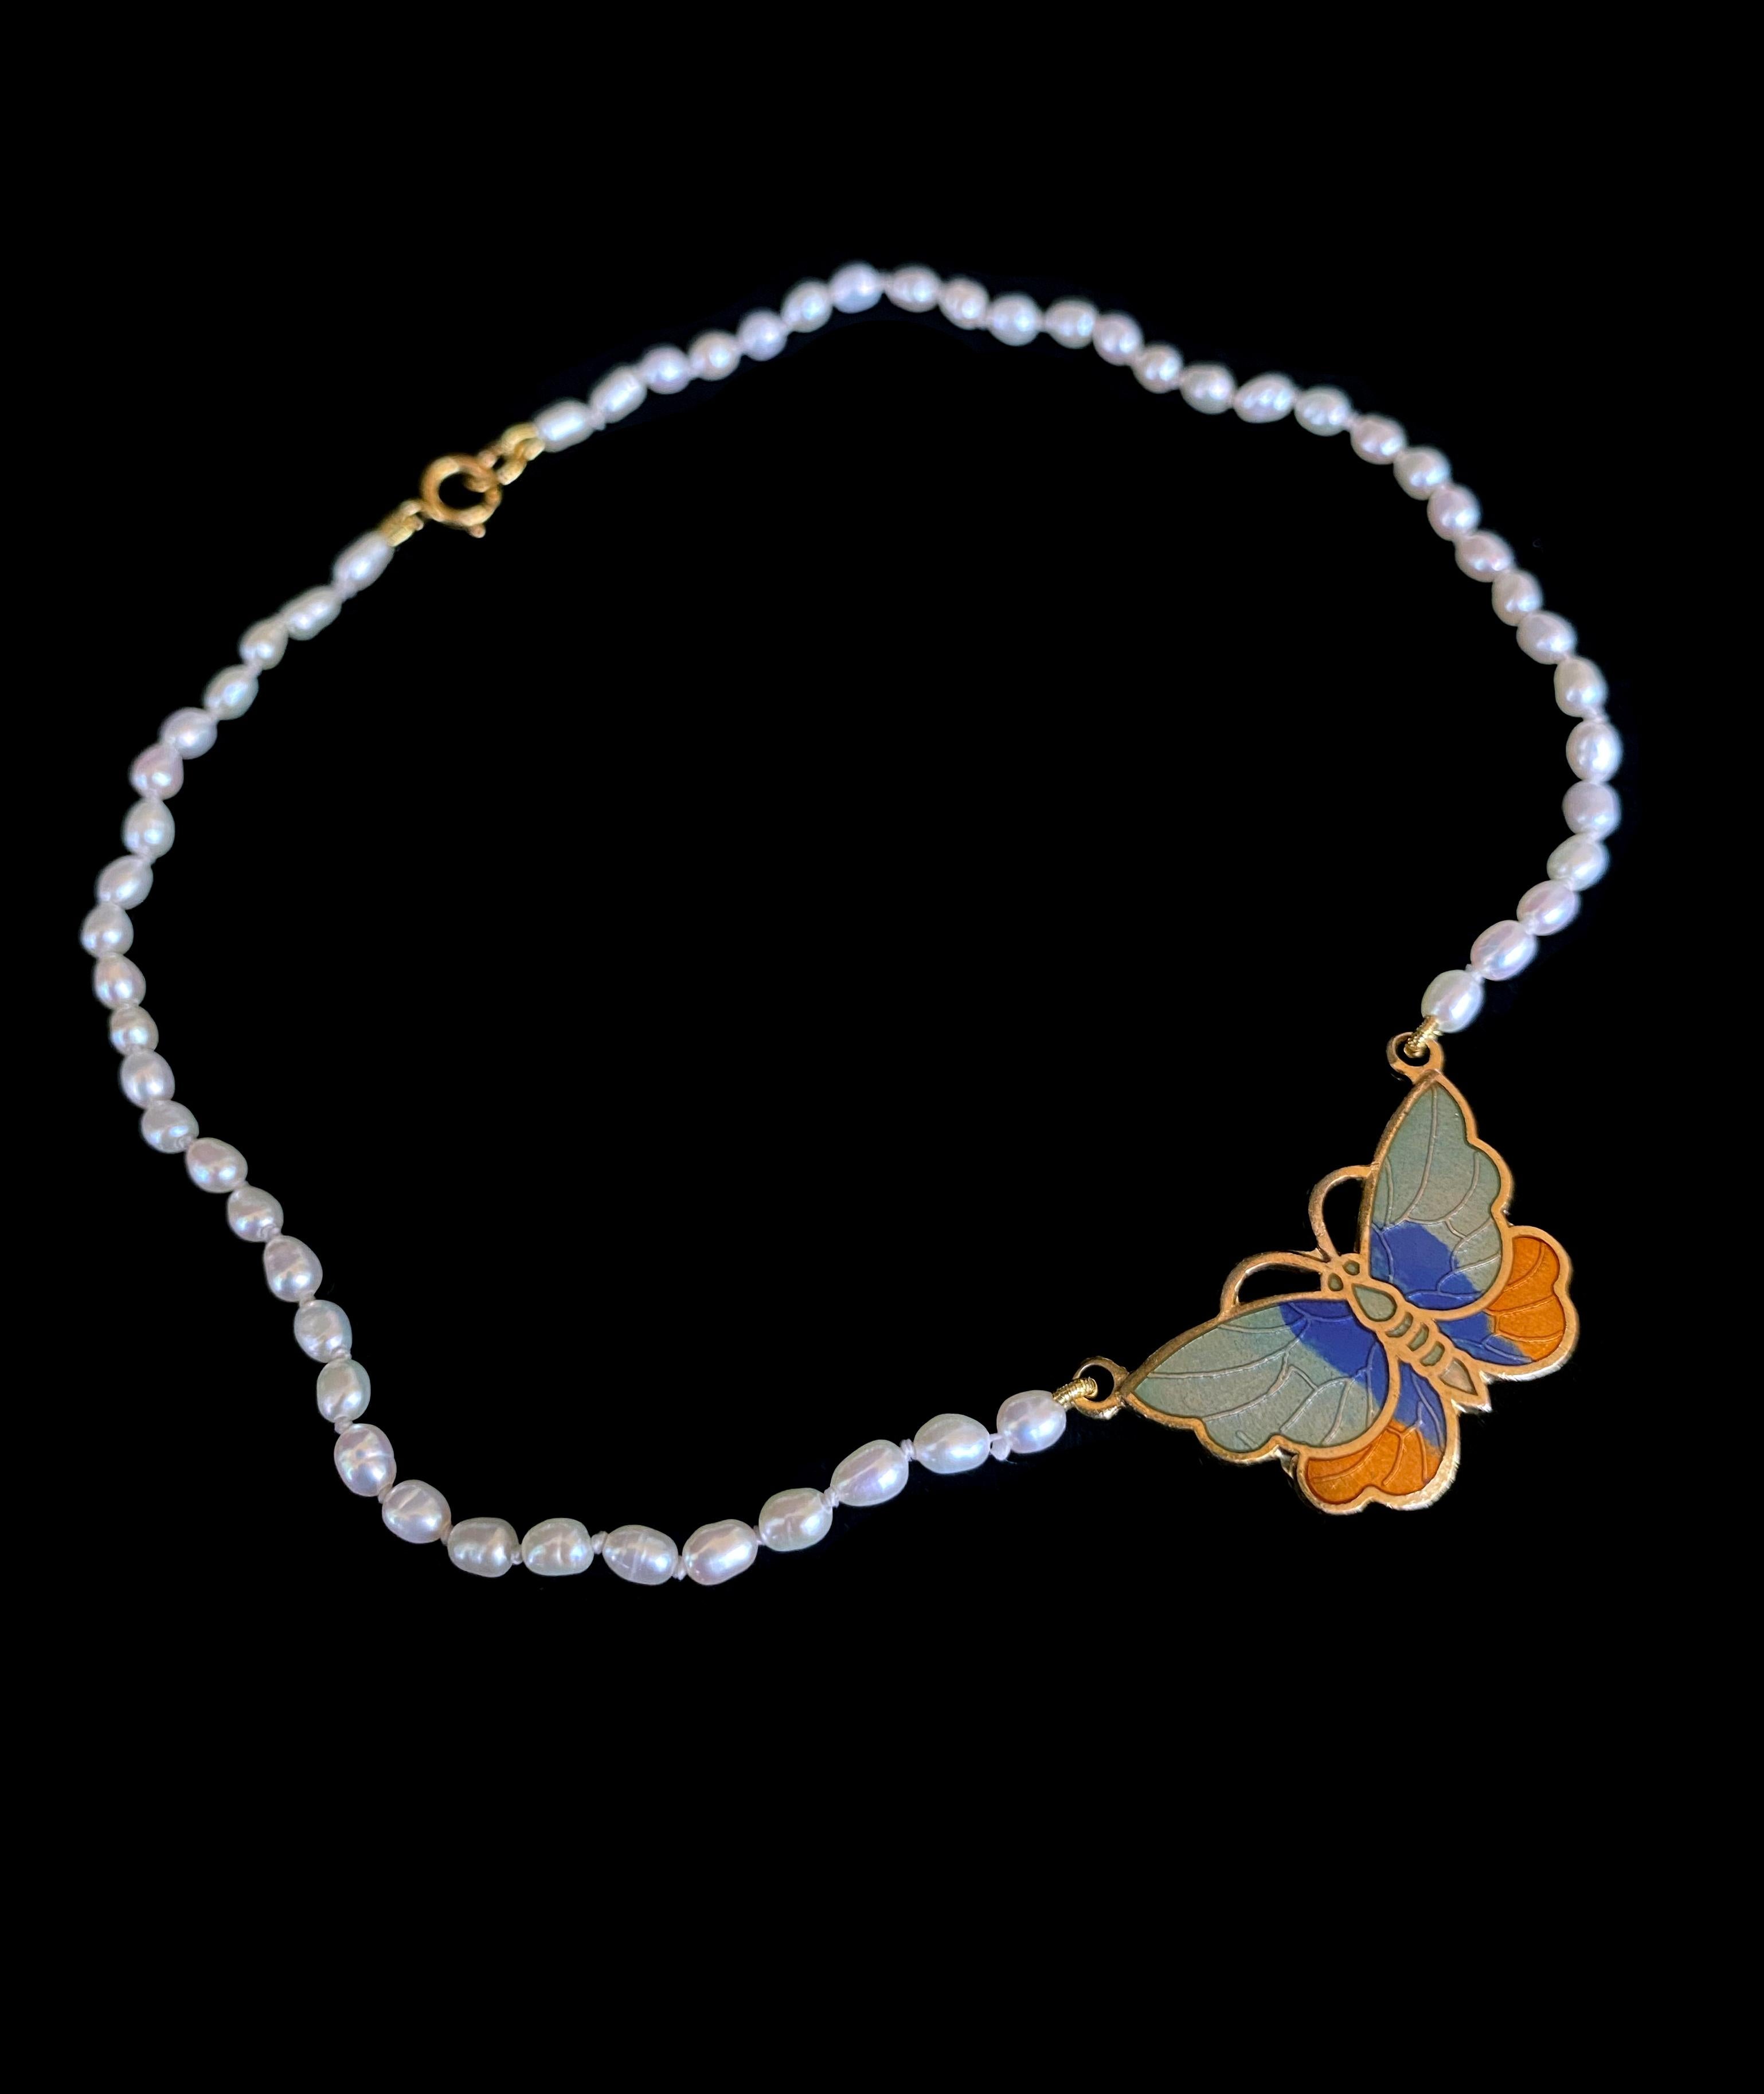 Simple and classic Pearl Necklace for the little loved one in your life, by Marina J. This Necklace features a whimsical Aqua, Blue and Orange Enamel Butterfly Gold Plated Pendant as its Centerpiece. The Butterfly includes slight detailings within